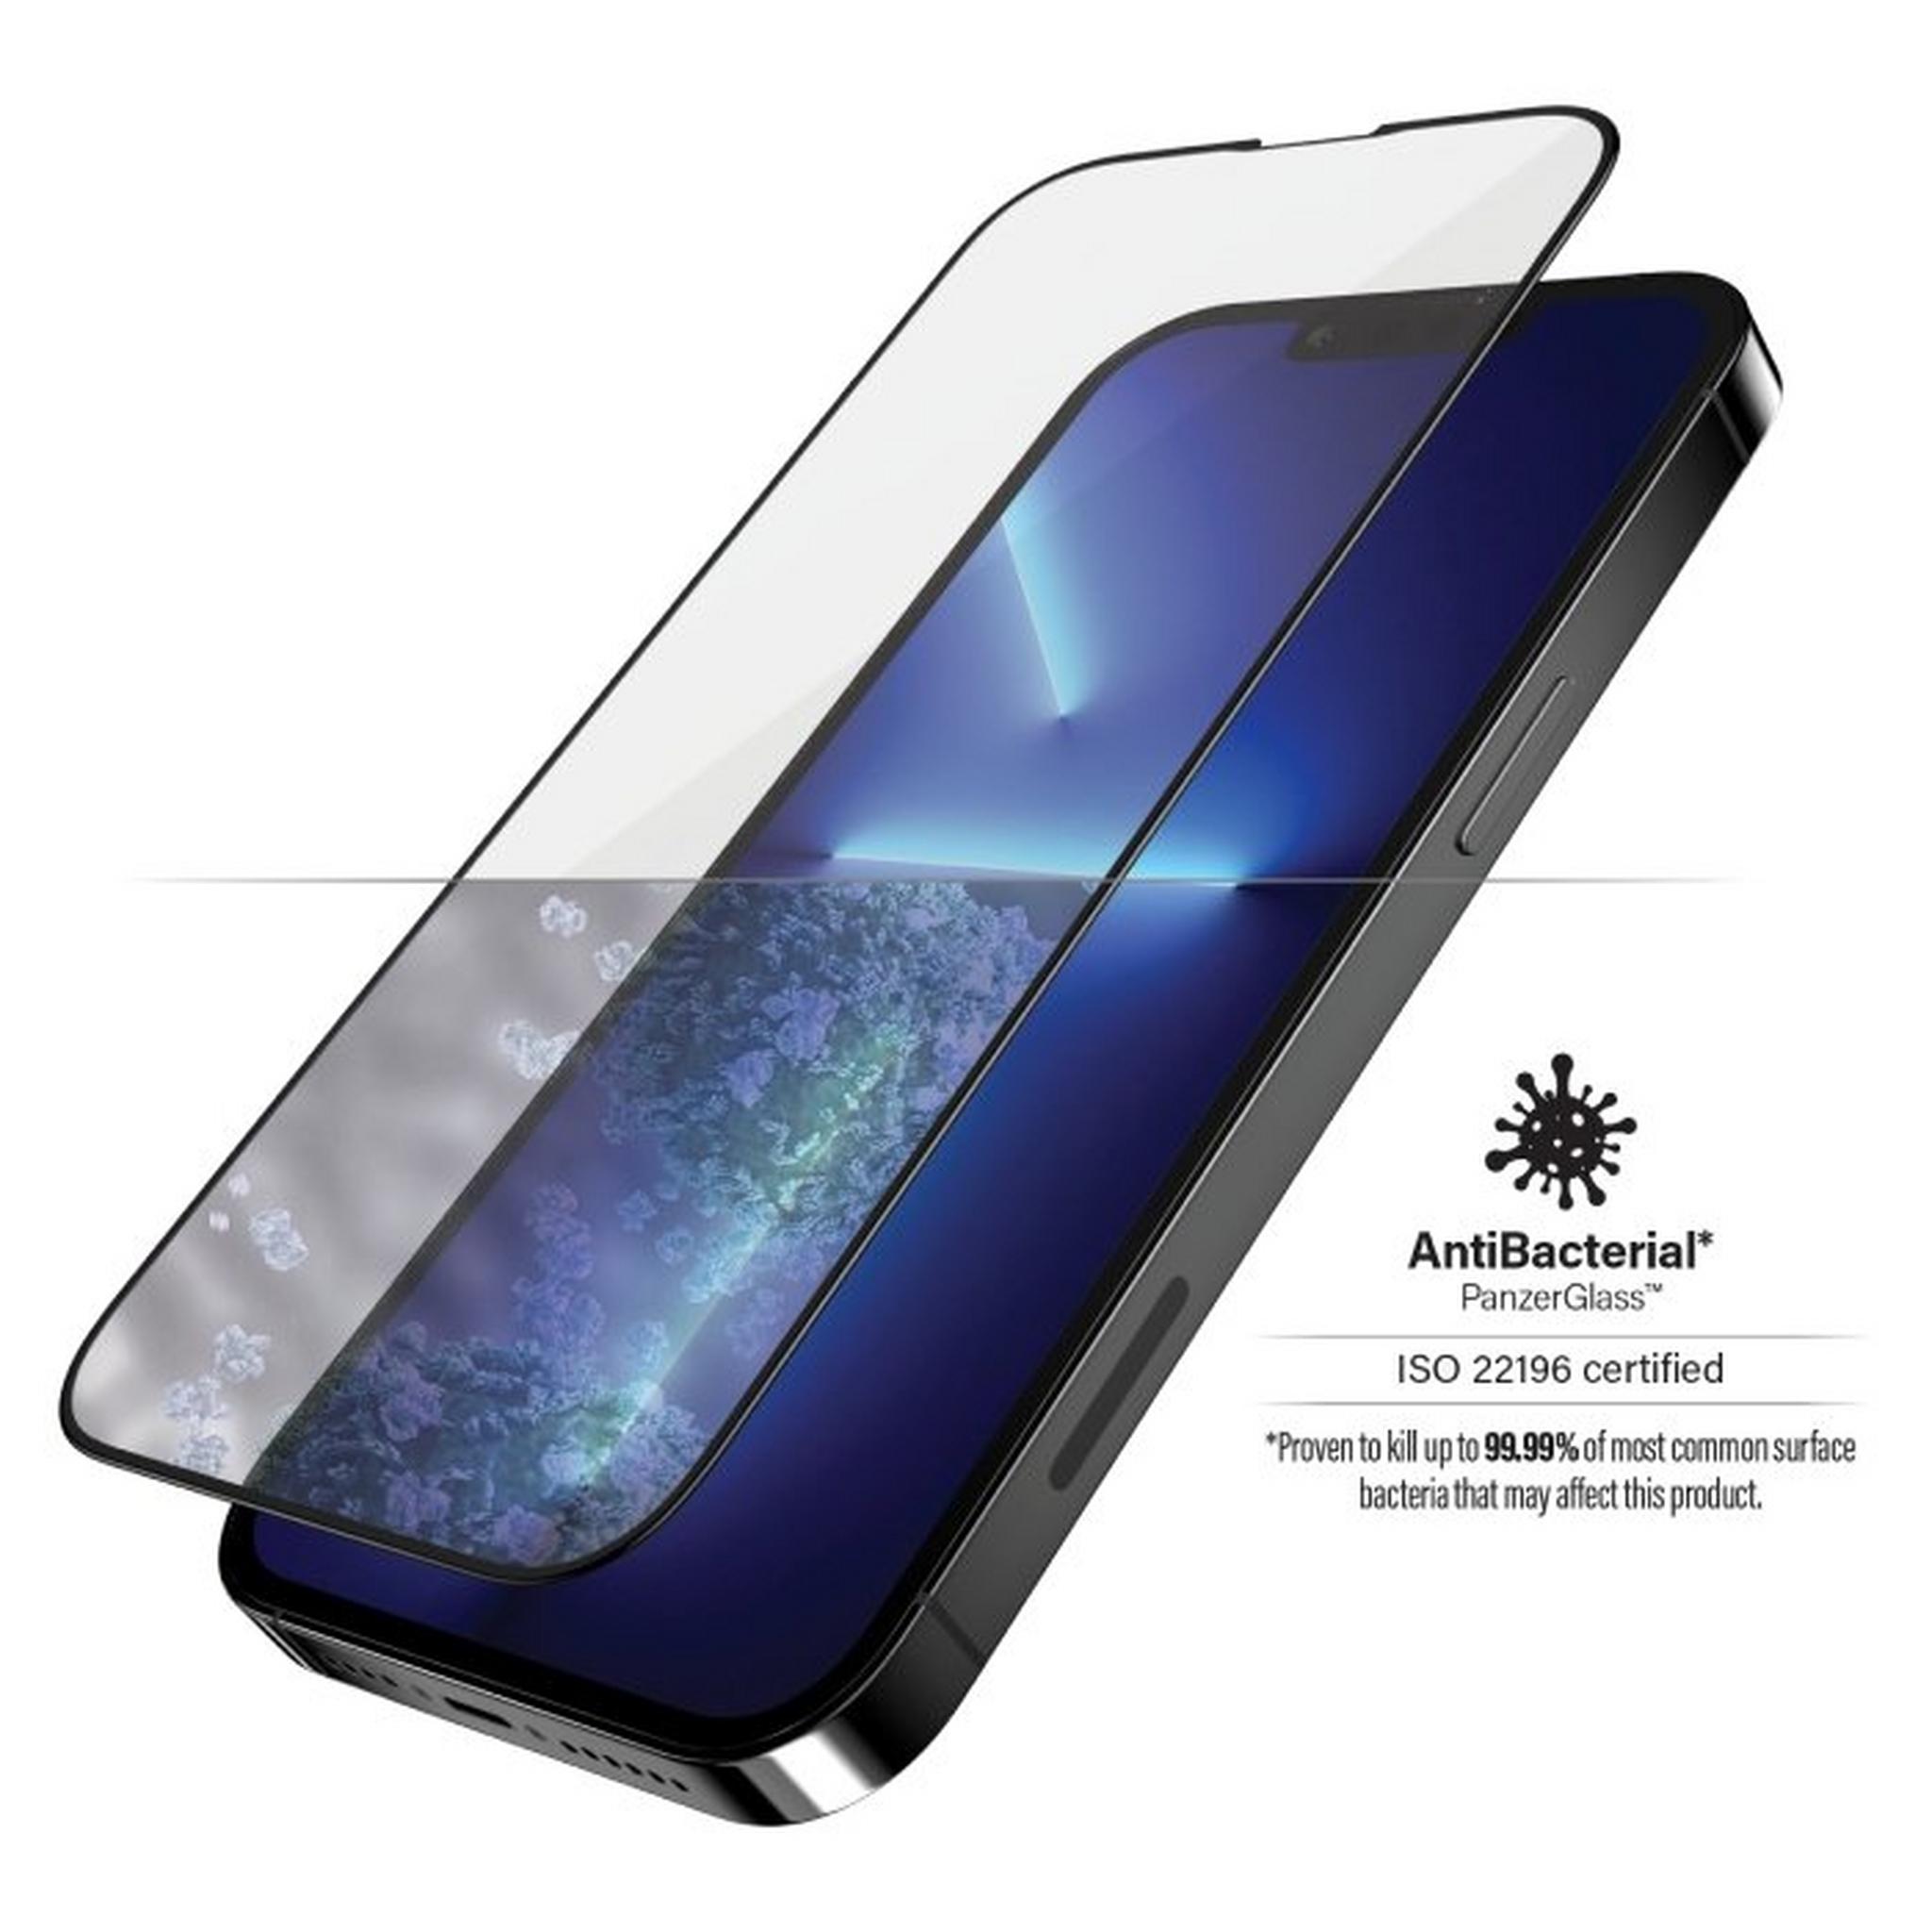 Panzer iPhone 13 Pro Max Glass Screen Protector - Clear